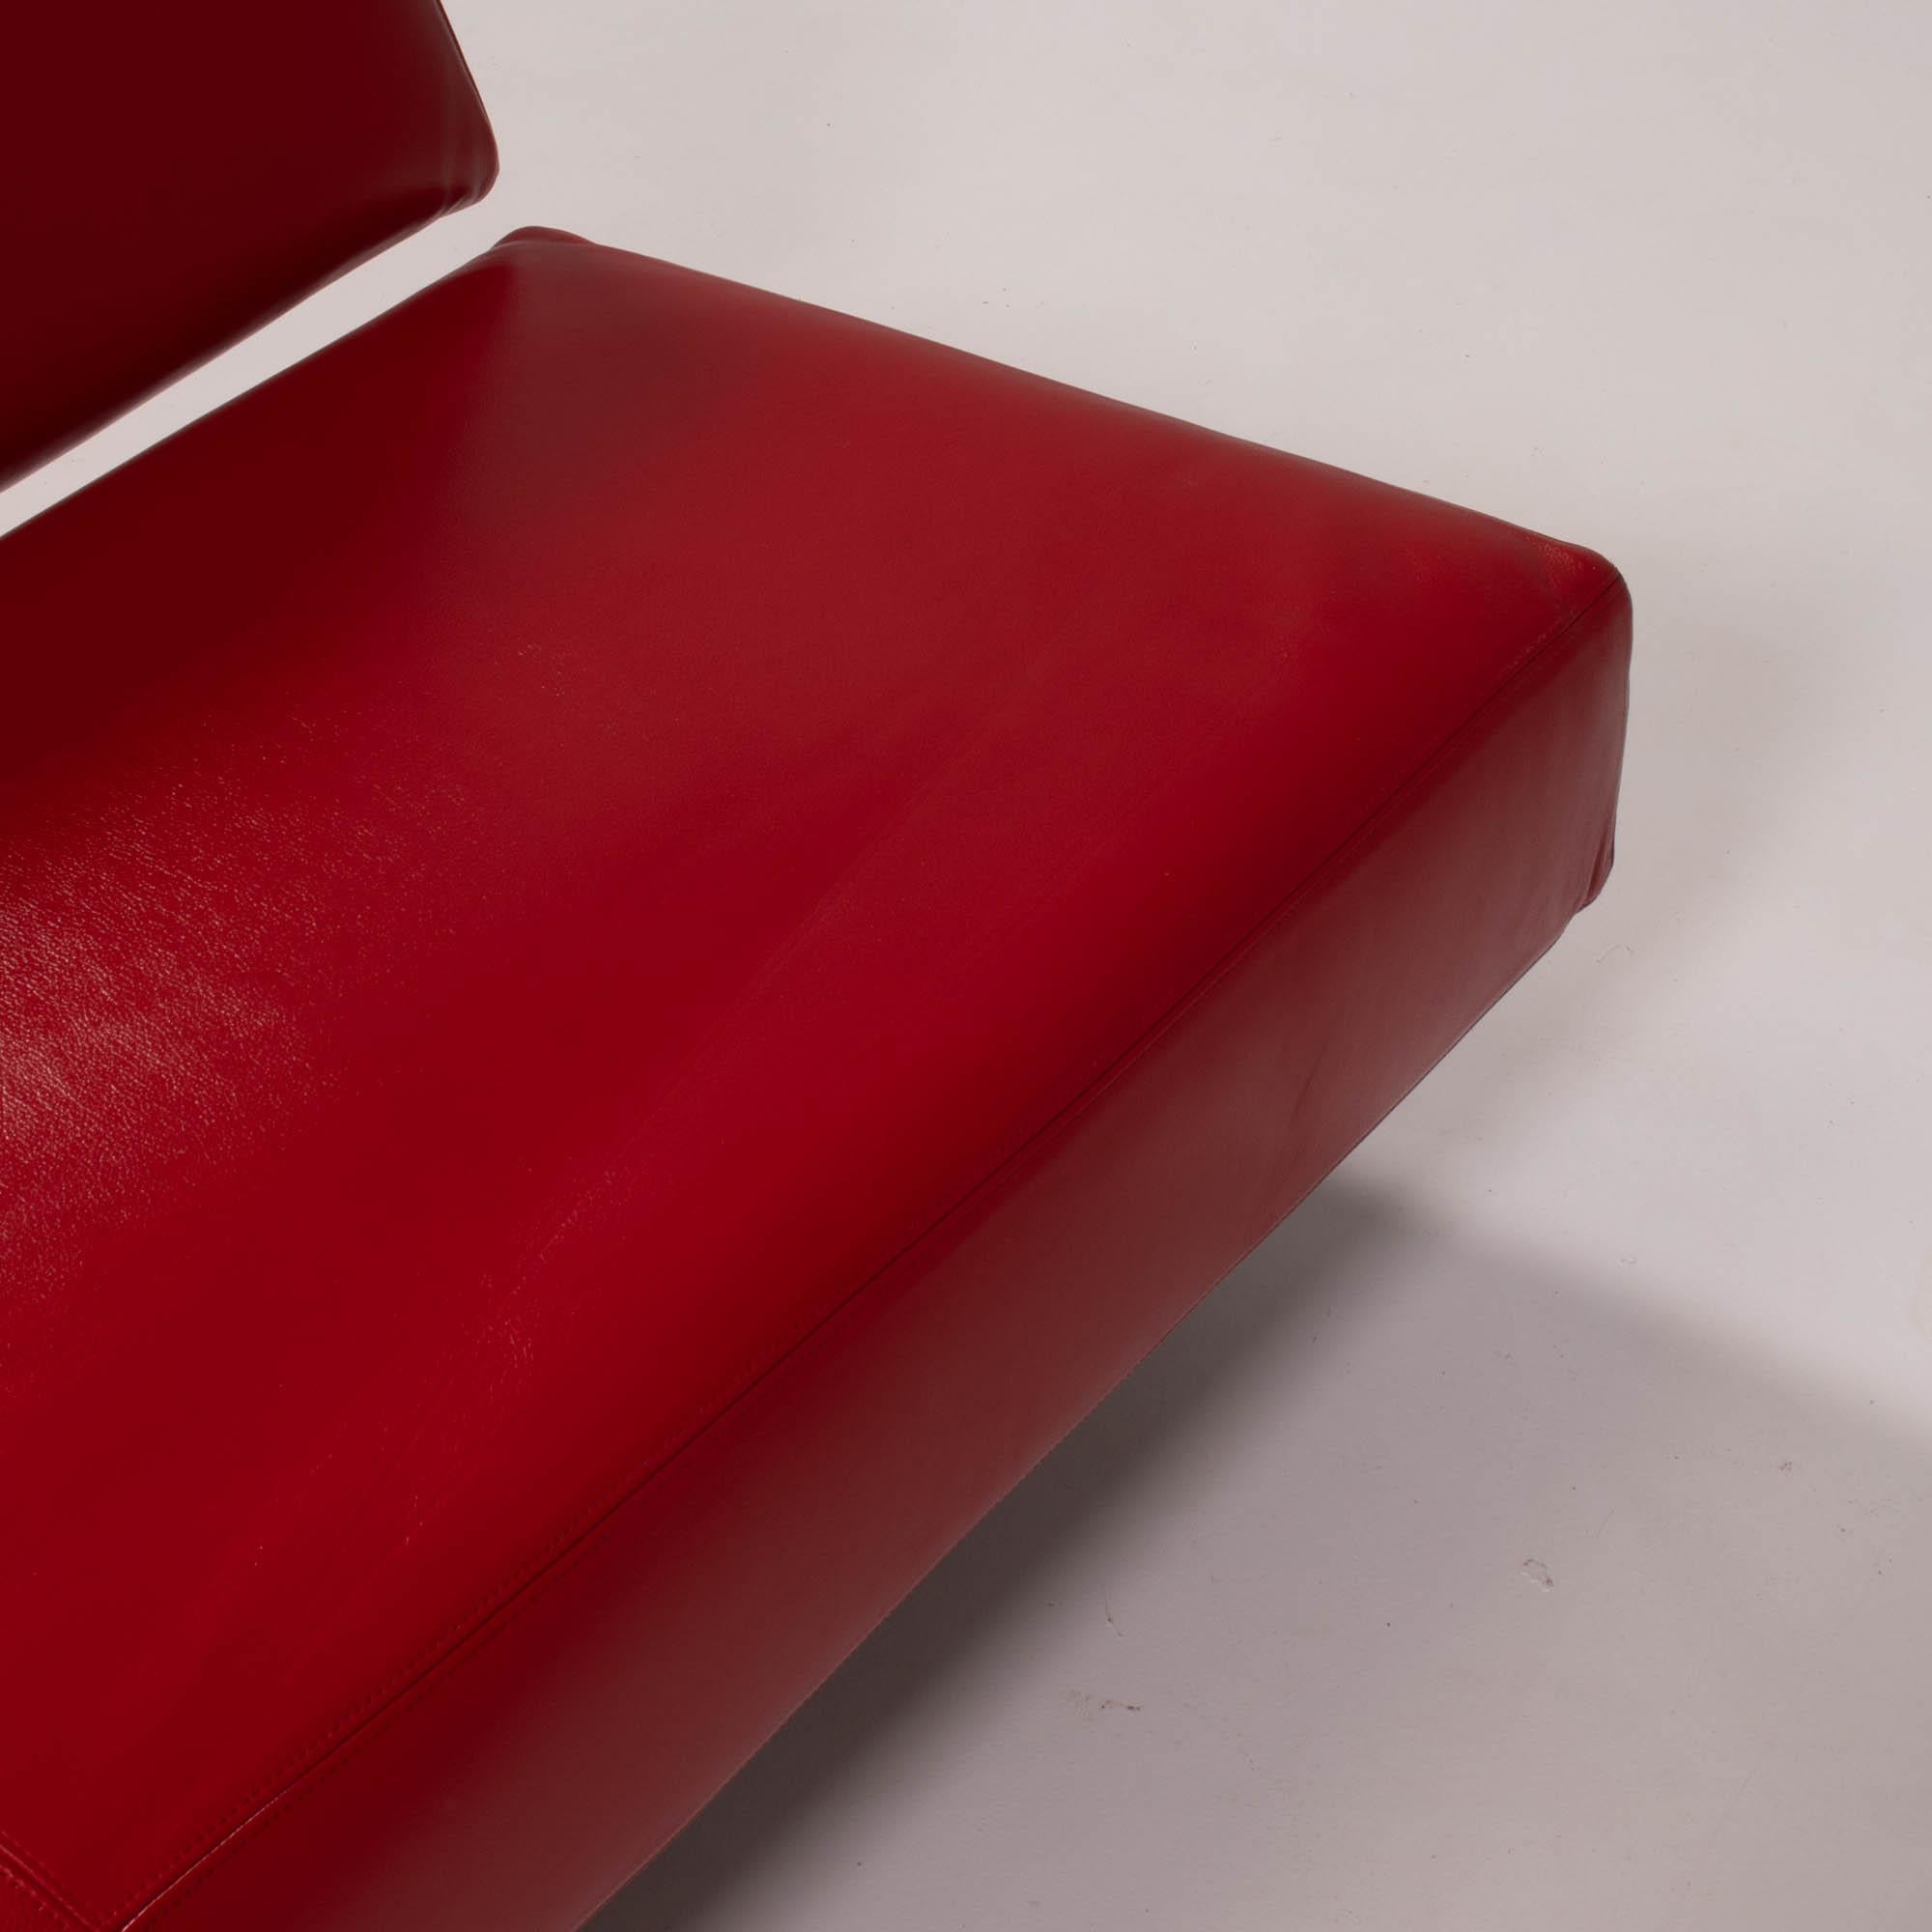 Cassina Asped Red Leather Sofa Byjean-Marie Massaud, 2005 For Sale 3